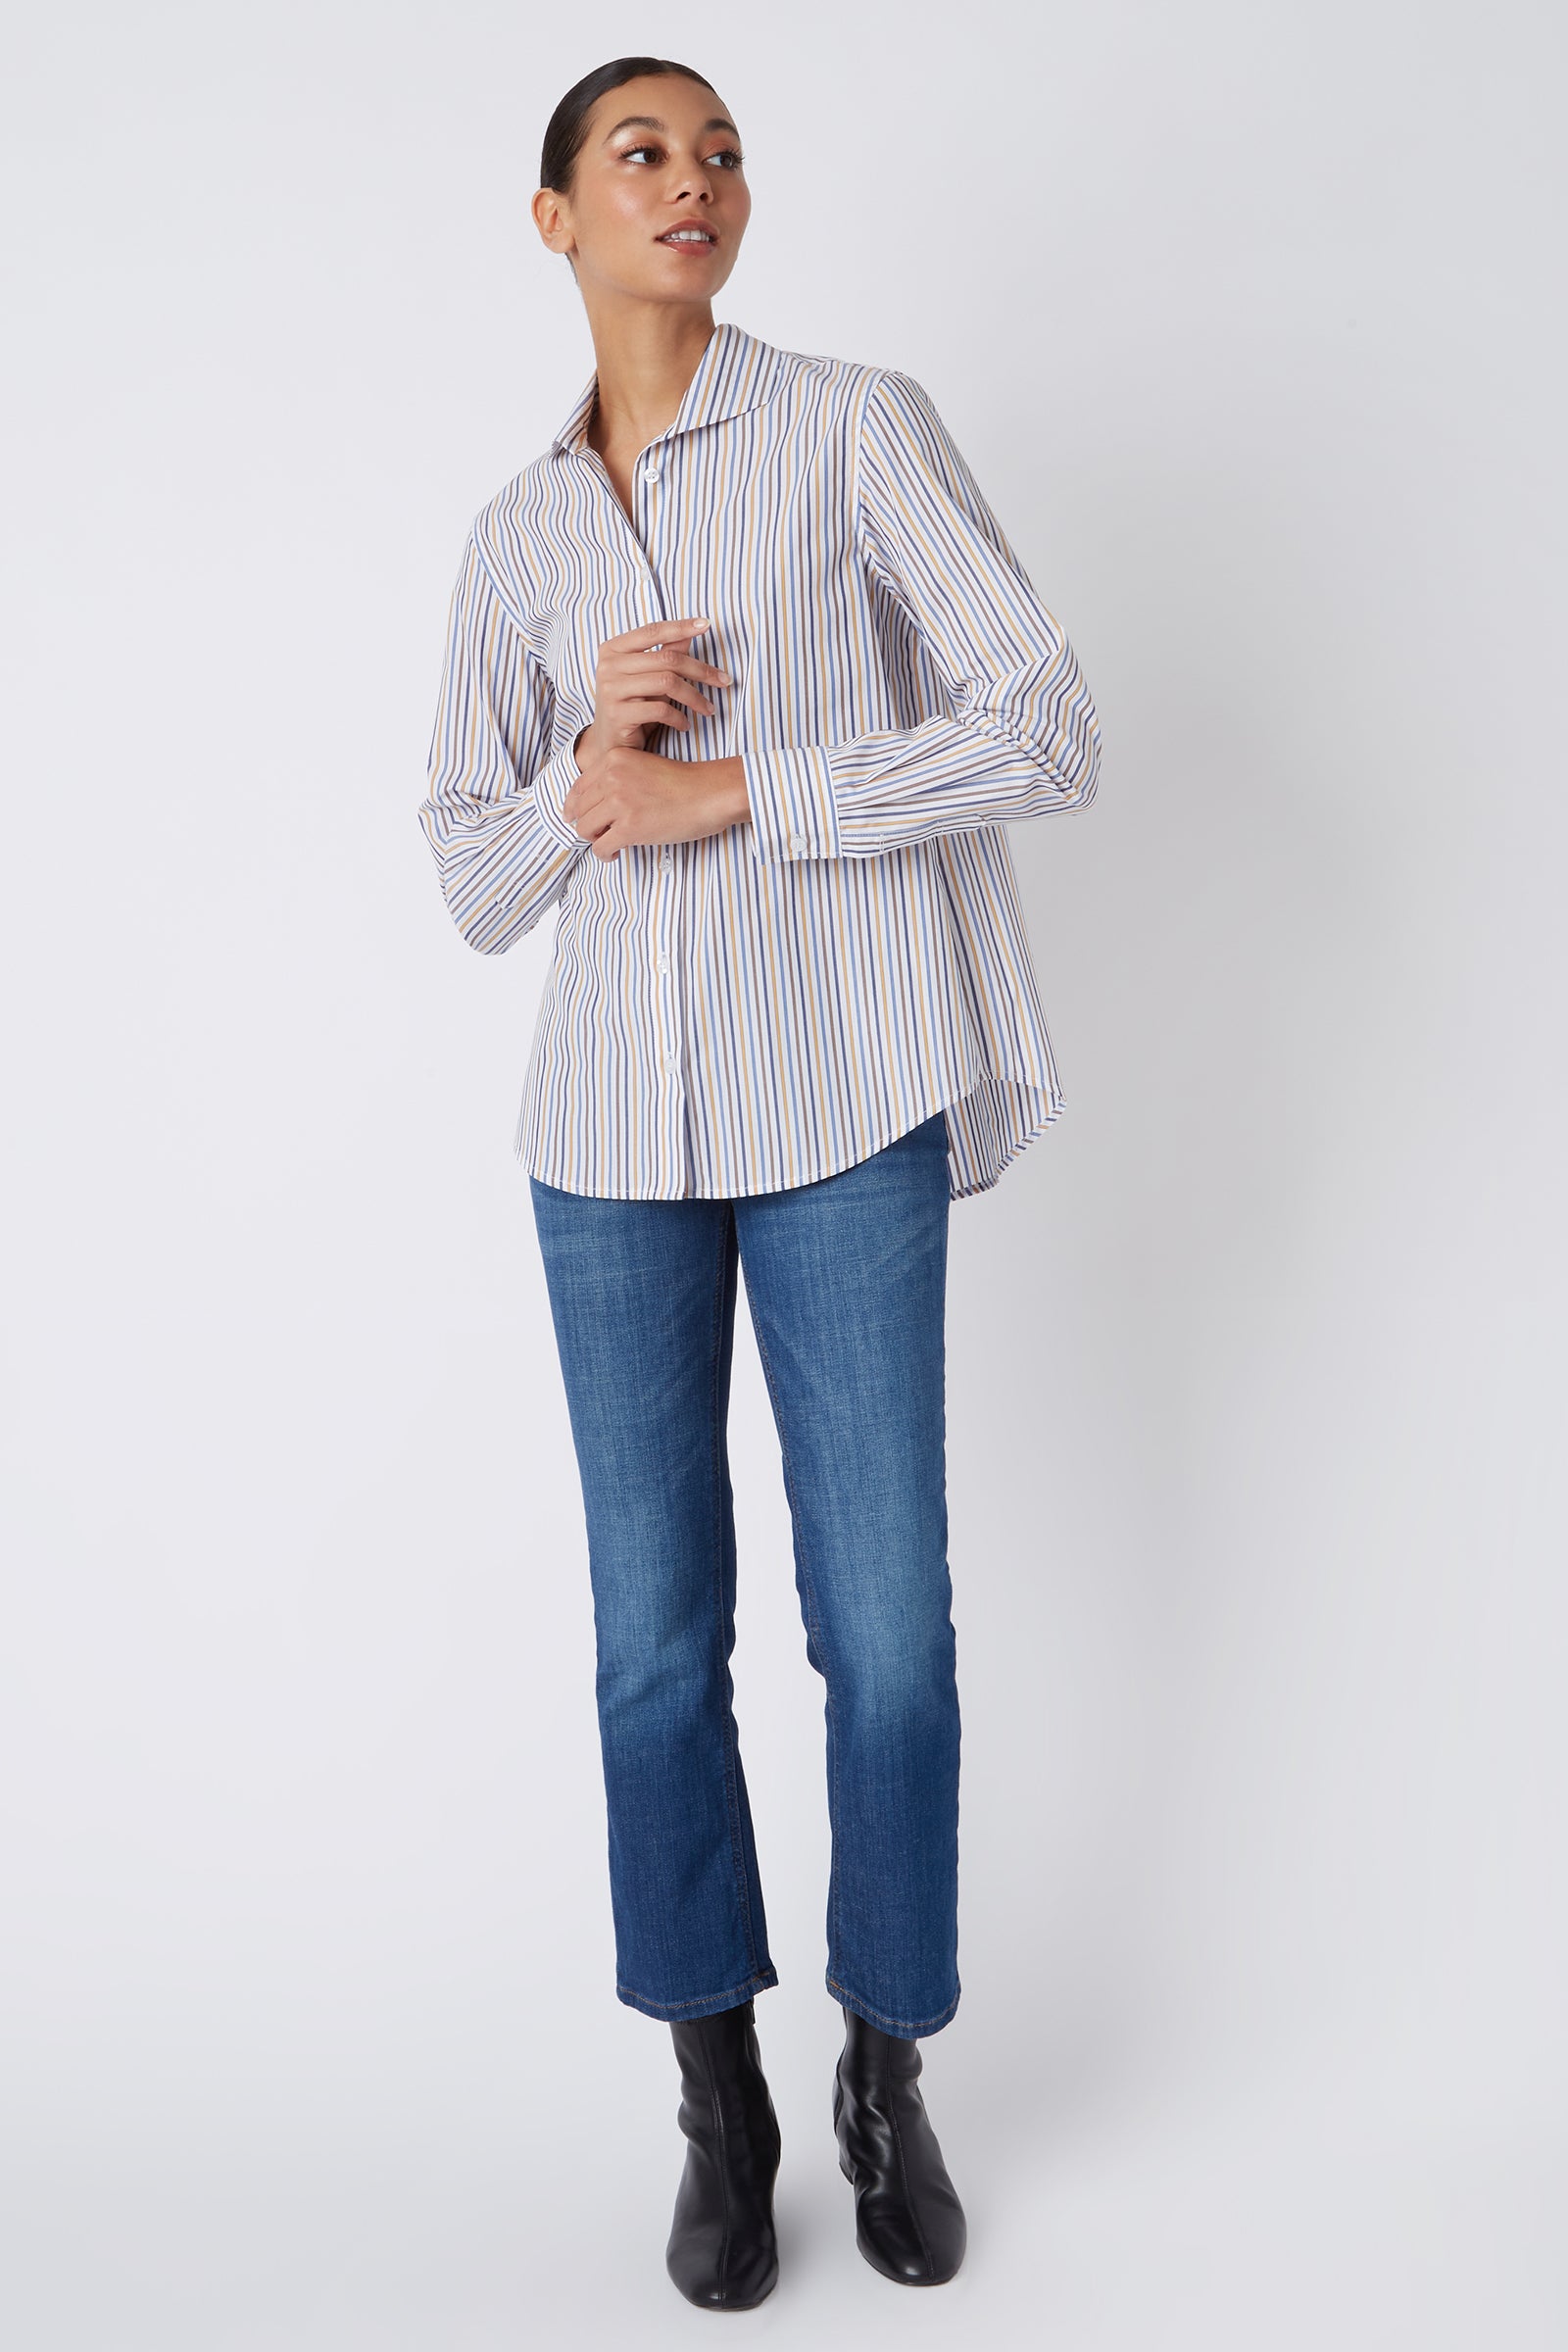 Kal Rieman Ginna Box Pleat Shirt in Multi Stripe Gold on Model Looking Left Full Front View